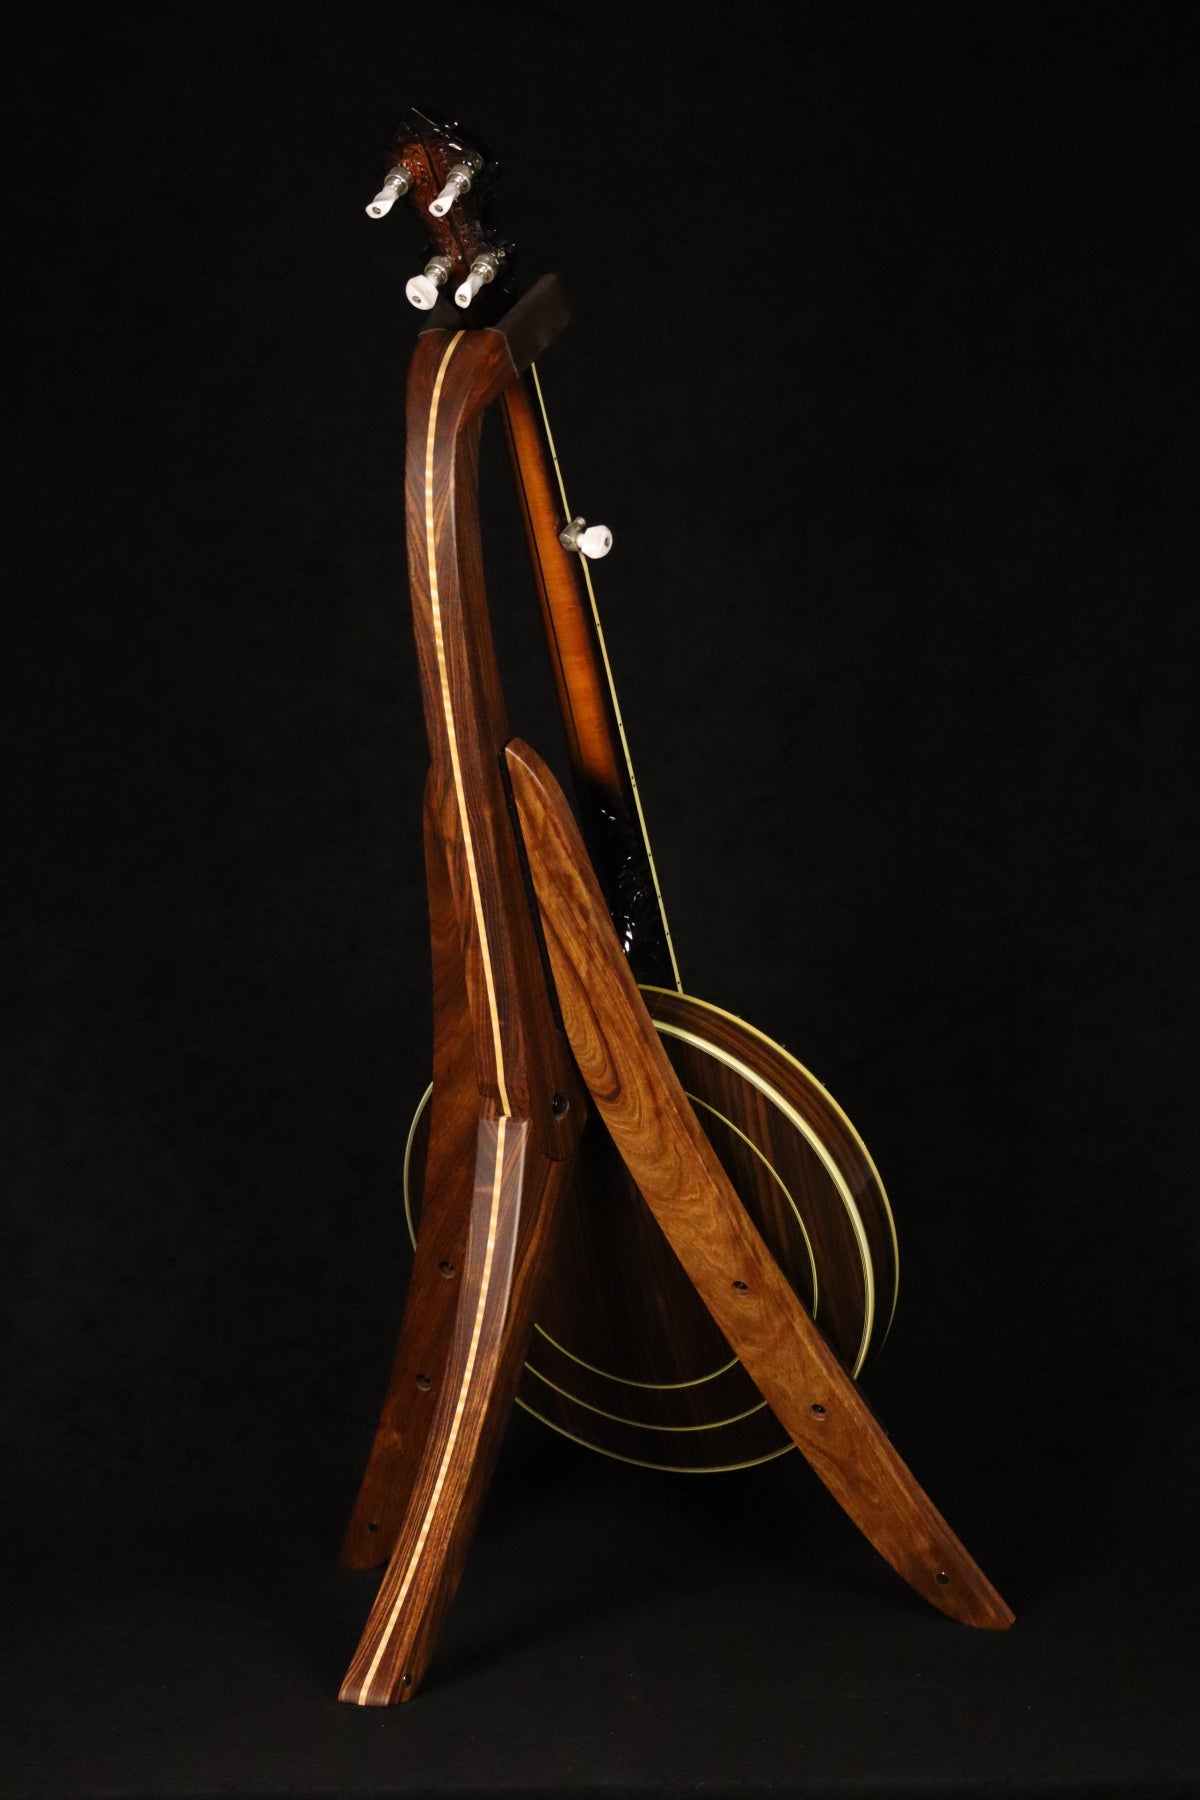 Folding chechen Caribbean rosewood and curly maple wood banjo floor stand full rear image with Alvarez banjo